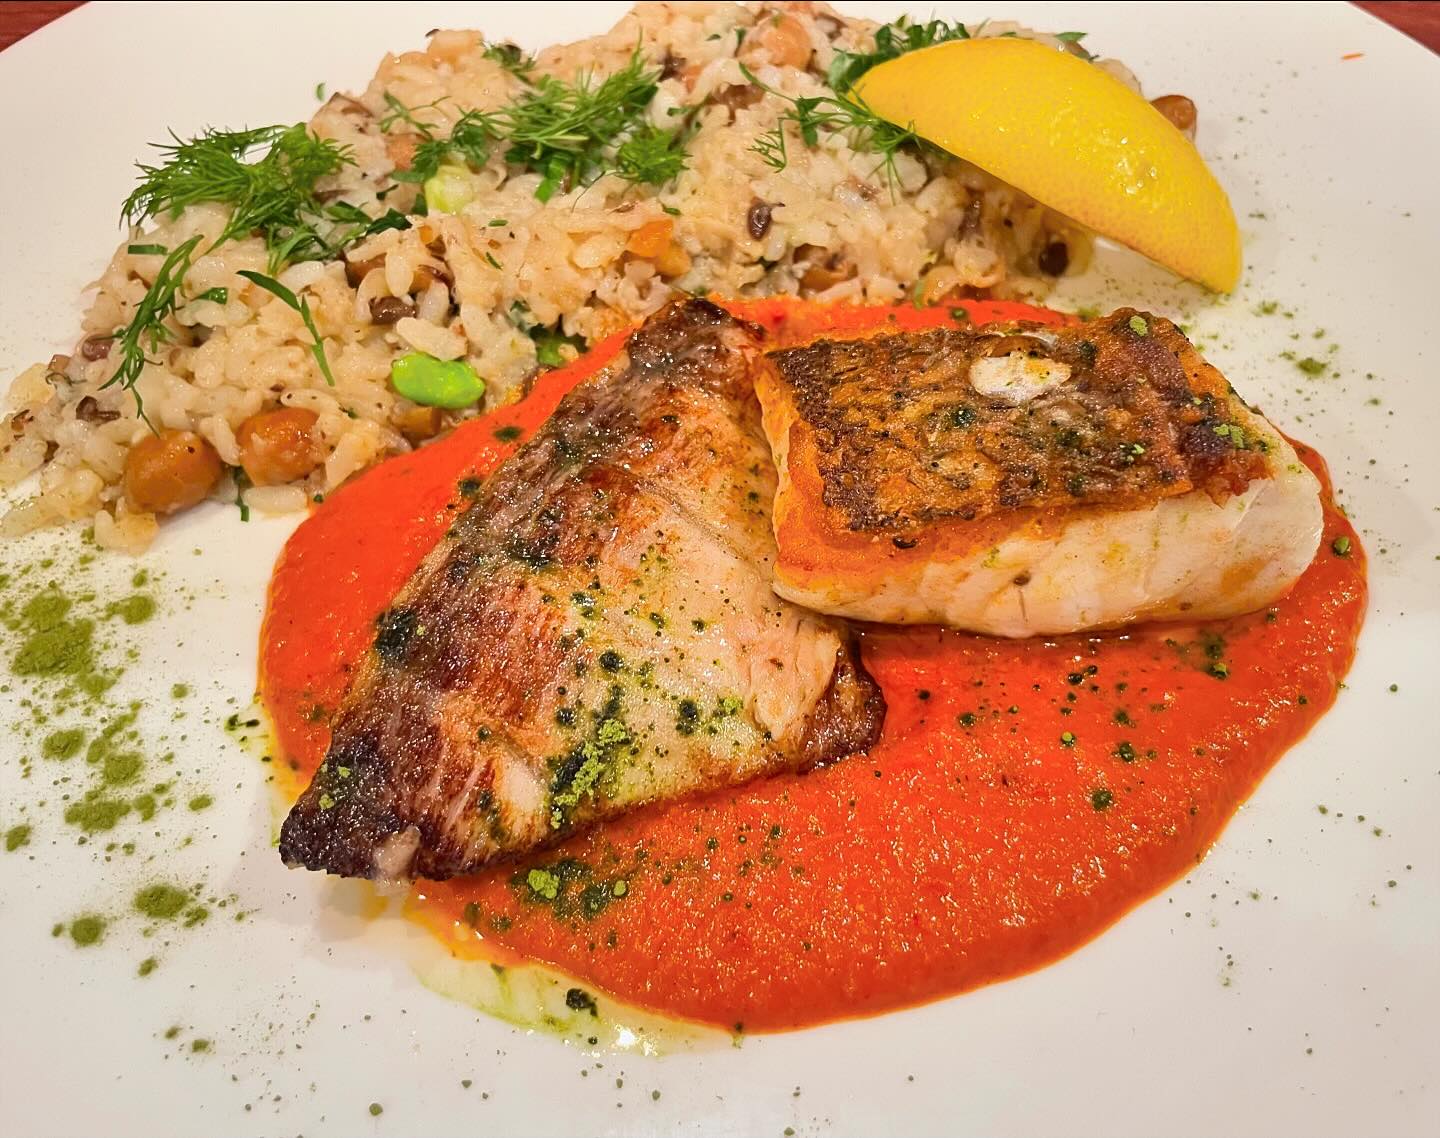 Chef’s next fish special is Goldband snapper sesame romesco sauce, peas and crabmeat risotto on the side. 🤤